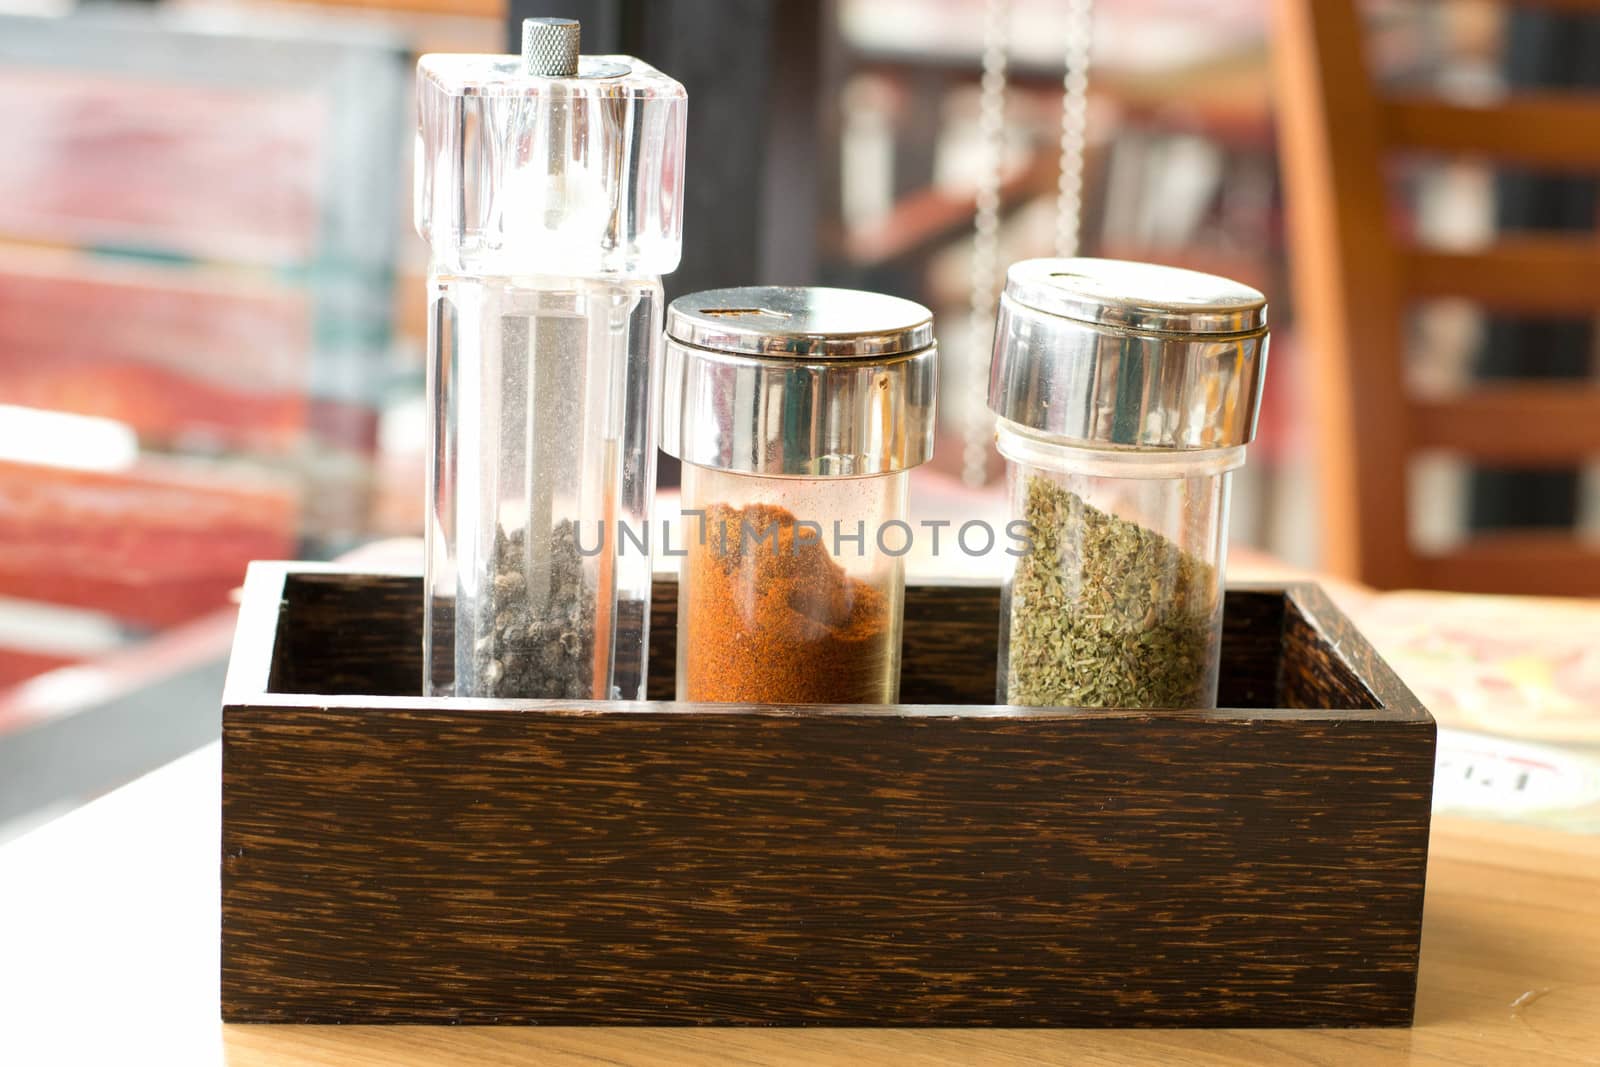  the pizza spices, salt, pepper, cheese shakers  by Thanamat